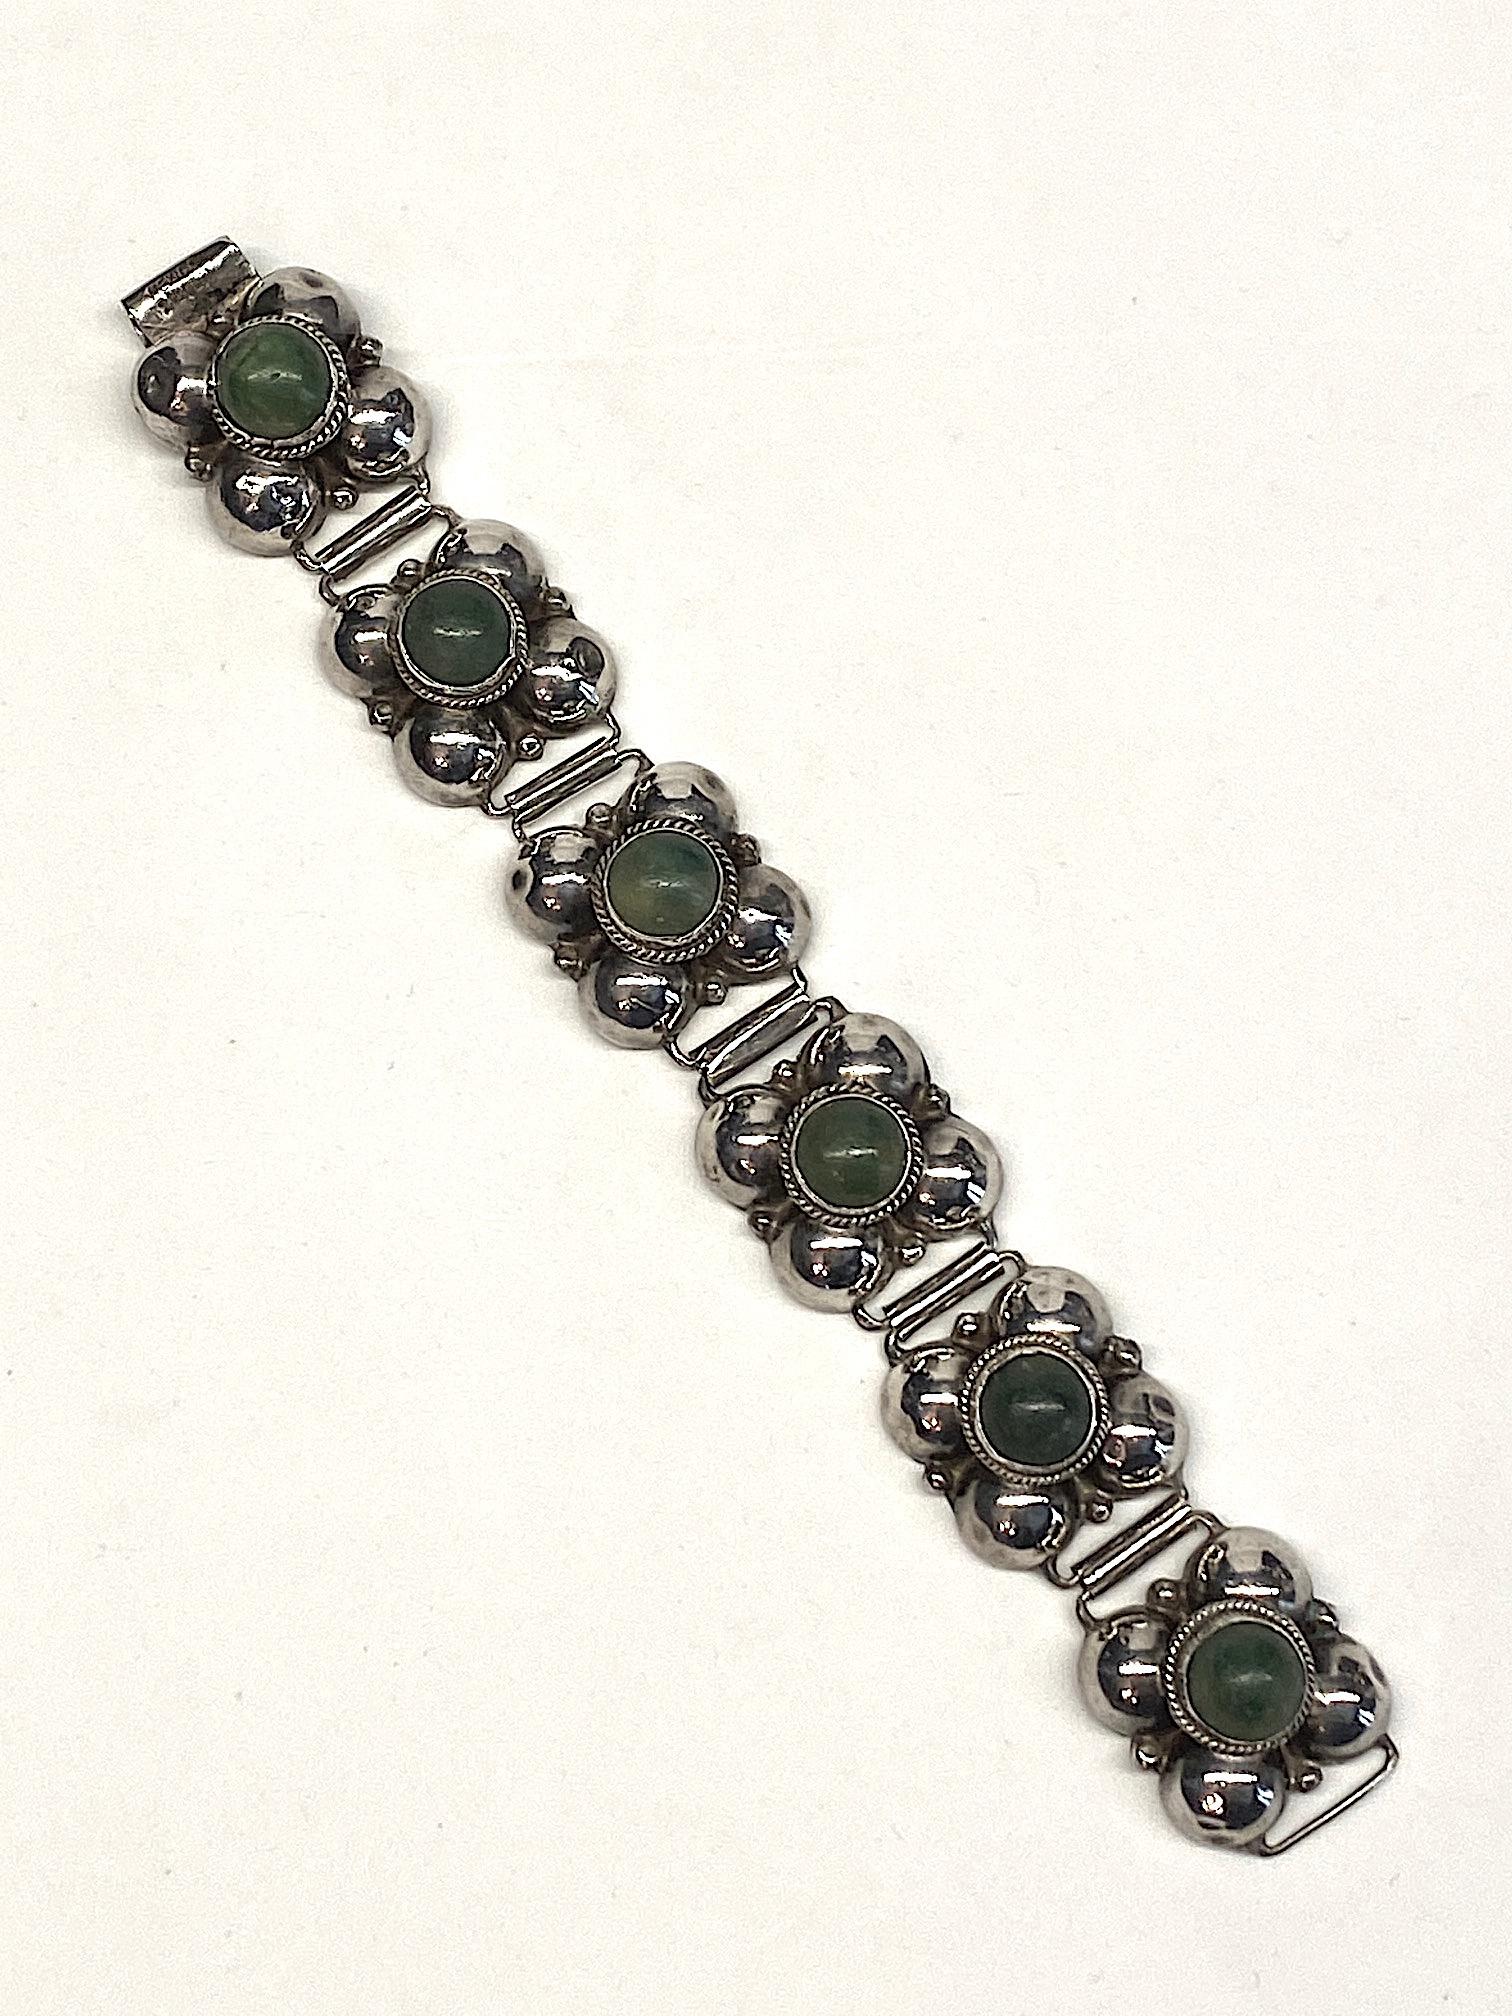 This Mexican 1940s silver bracelet is comprised of six links .88 of an inch square. Each link is set with a central 11 mm green calcite cabochon on top and has a solid plate on the back. The bracelet measures .88 of an inch wide, 7.5 inches long and